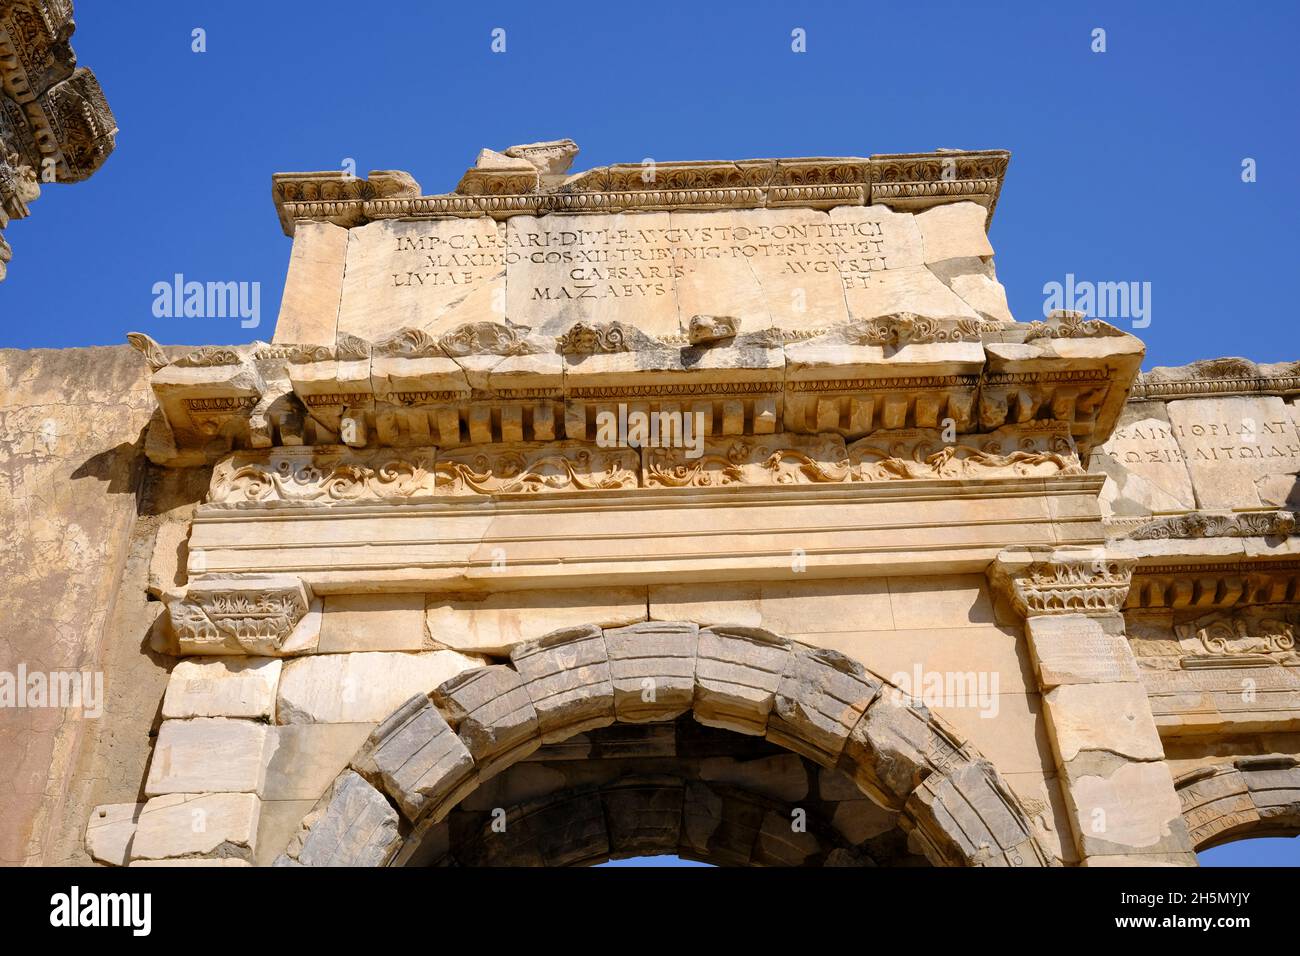 The Gate of Augustus in Ephesus, Turkey built to honor the Emperor Augustus and his family Stock Photo